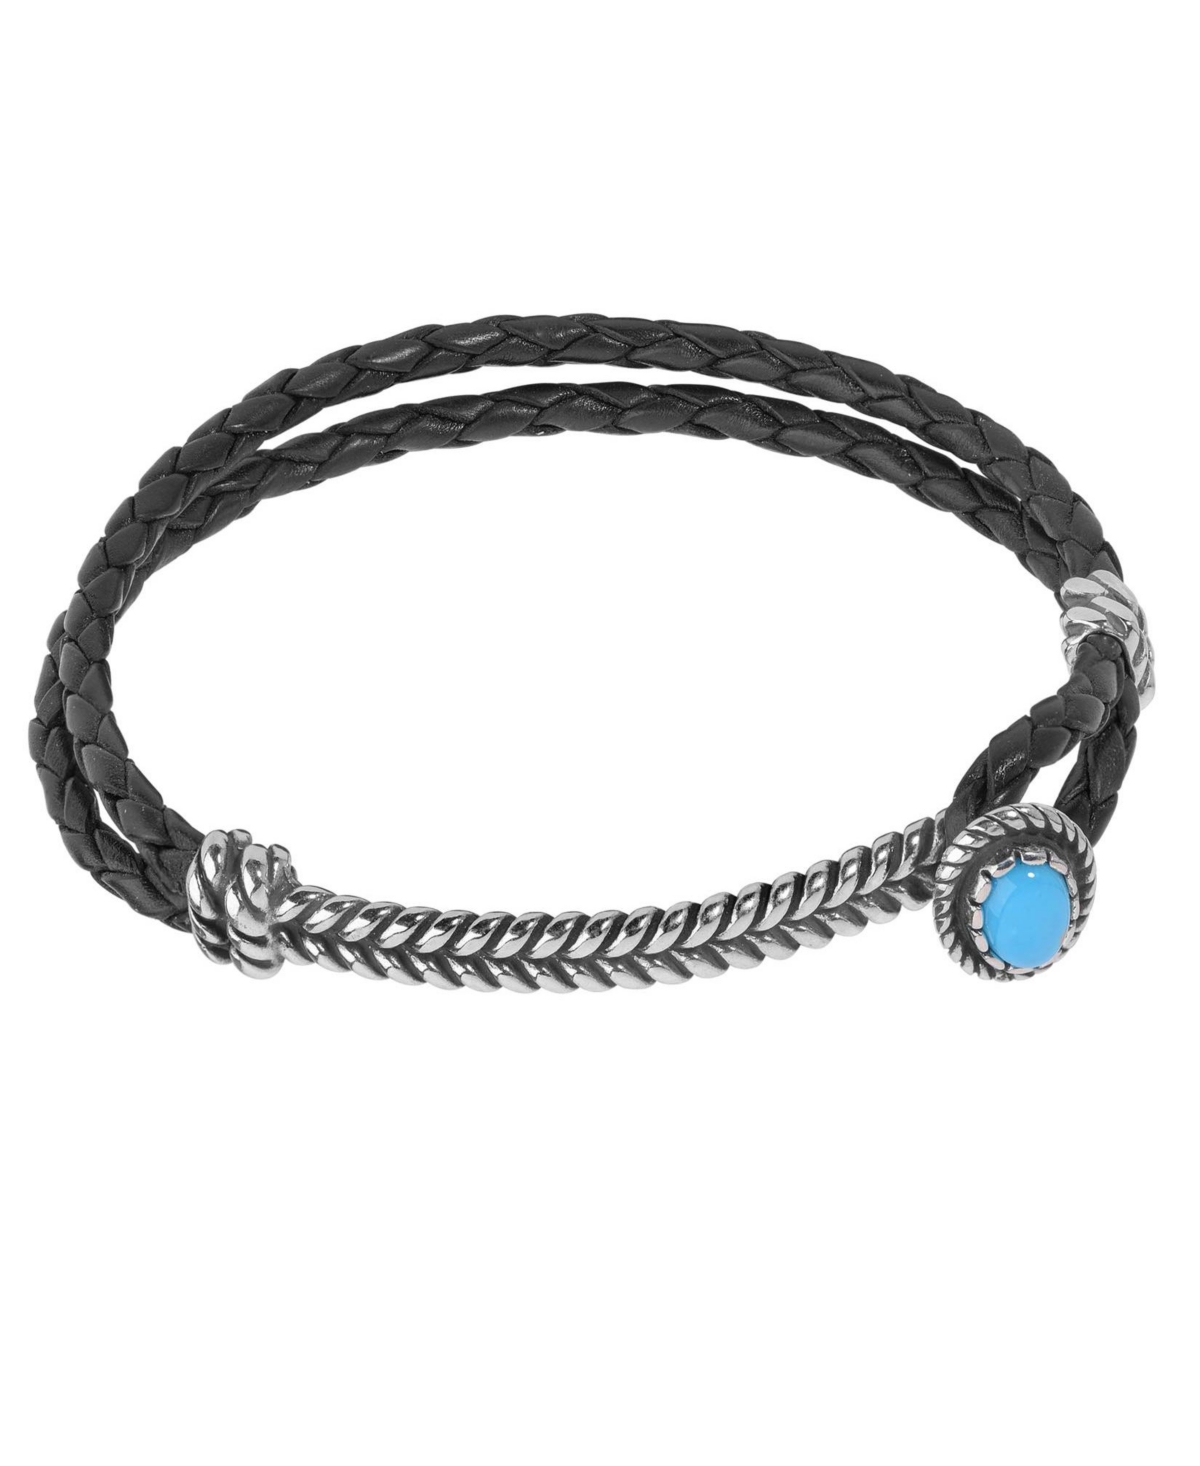 Sterling Silver Women's Leather Bracelet Blue Turquoise Gemstone Size Small - Large - Blue turquoise